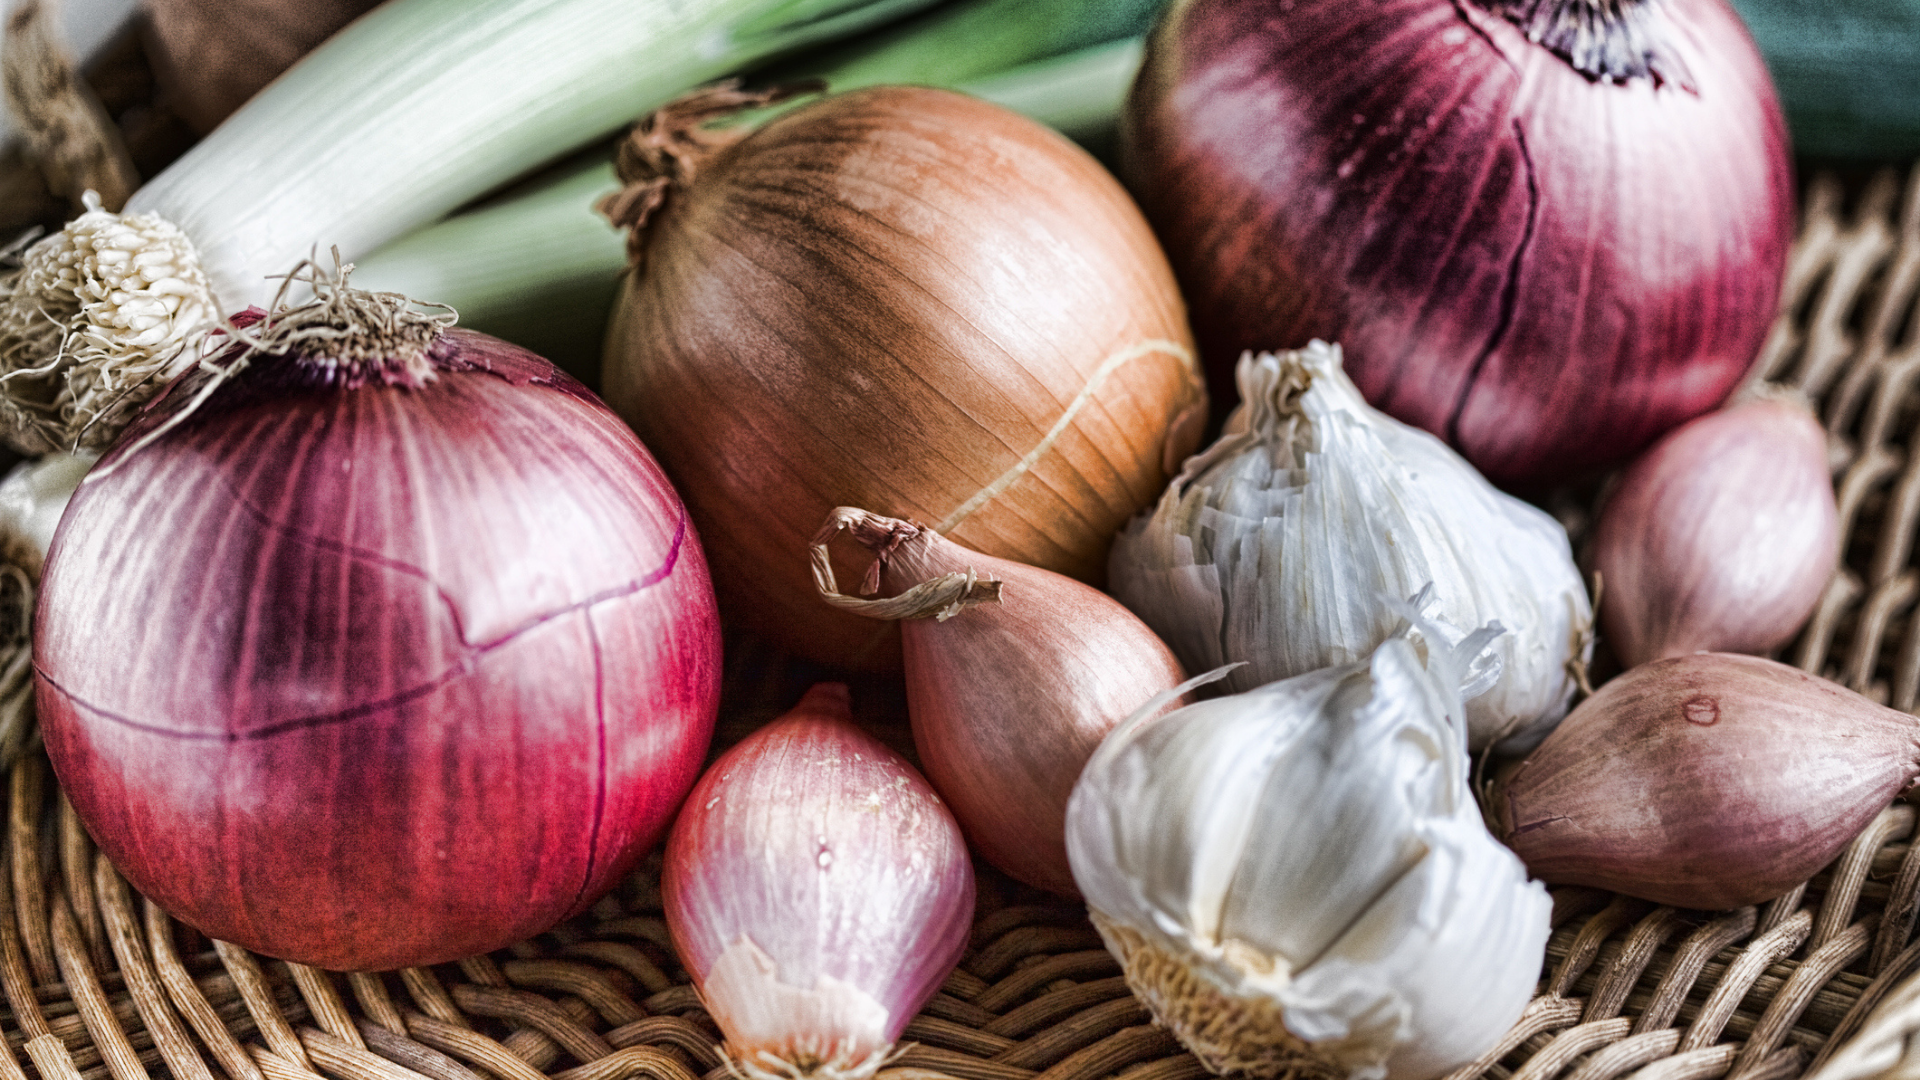 Prebiotic foods such as onions and garlic